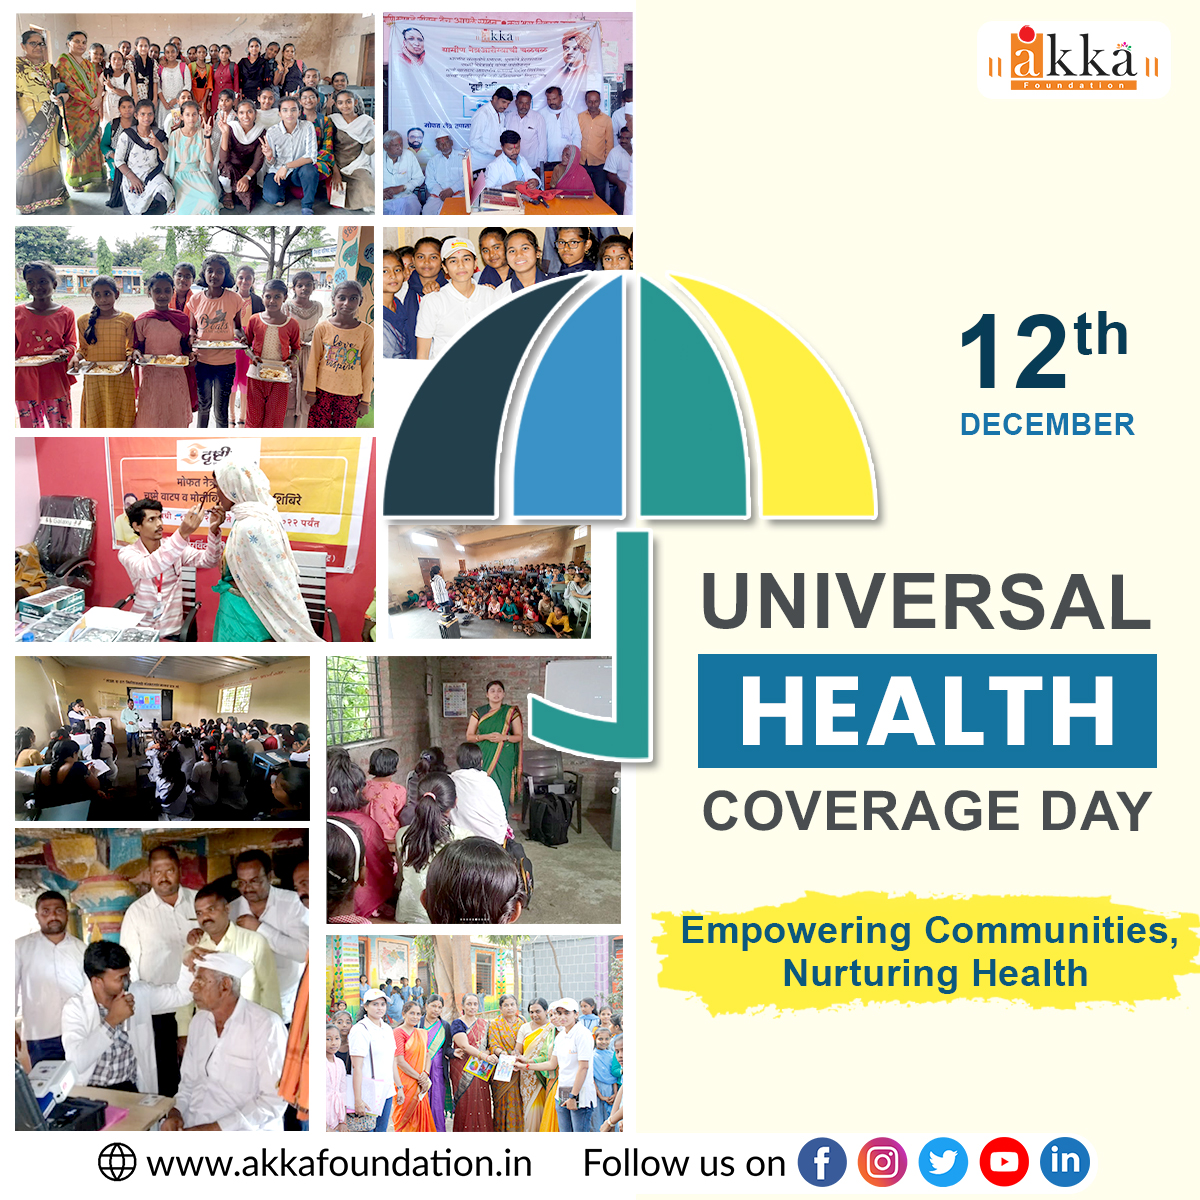 Community health is the heartbeat of global well-being. Akka Foundation celebrates those working at the grassroots level for a healthier world.
.
.
.
#UHCDay #HealthForAll #UHC2030 #CoverEveryone #AccessToHealth #UniversalHealth #QualityCareForAll #NoOneLeftBehind #HealthEquity…